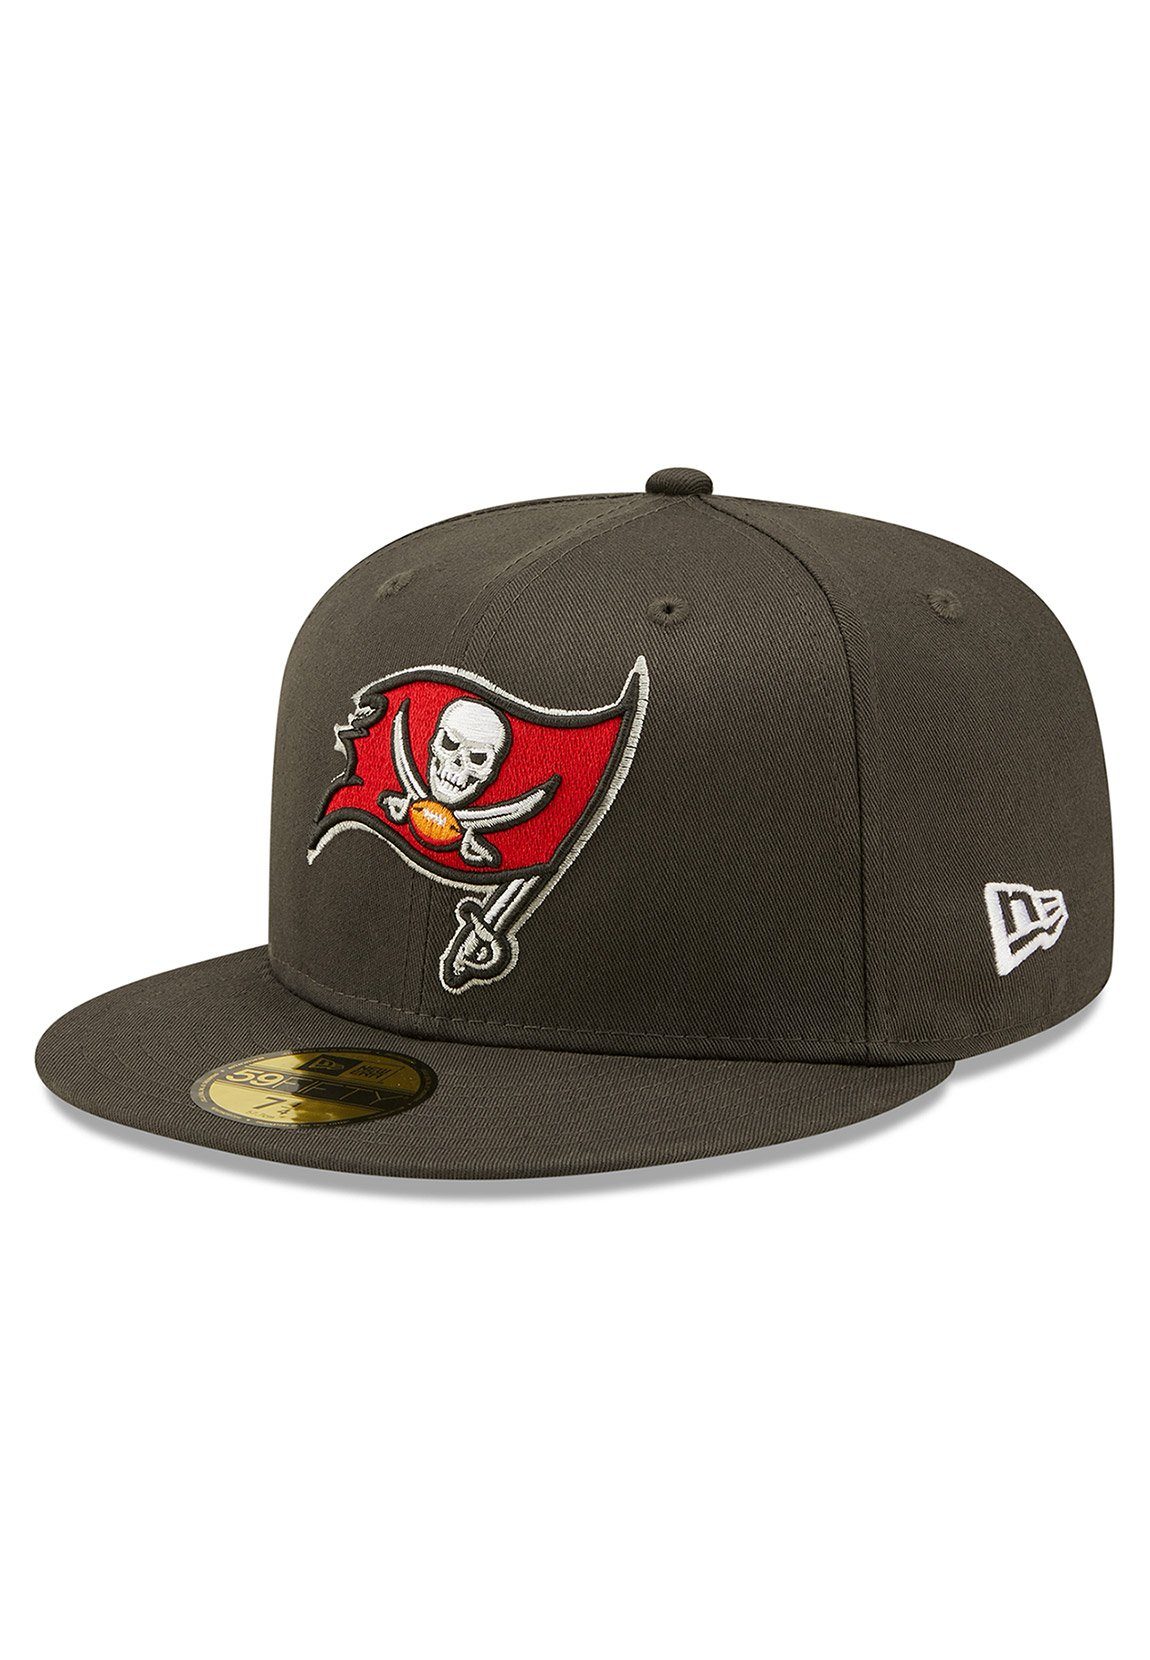 New Era Fitted Cap BUCCANEERS New TAMPA Charcoal BAY Grau 59Fifty Patch Side